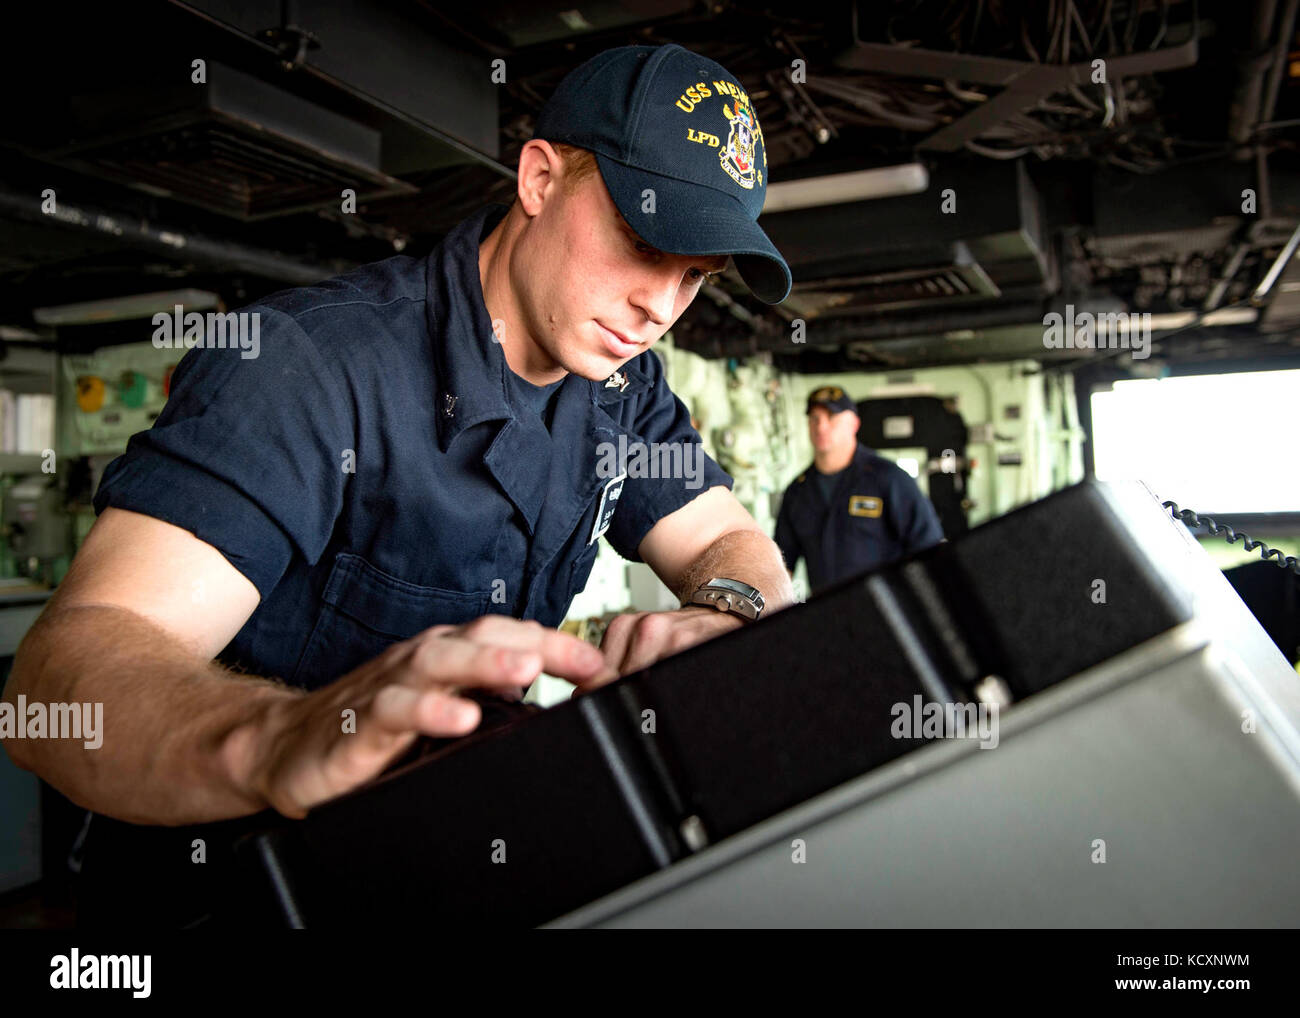 171007-N-YL073-0155   MAYPORT, Fla., (Oct. 7, 2017) Operations Specialist 3rd Class Stephen Williams, of Oscala, Florida , operates a navigation scope on the bridge aboard the amphibious transport dock ship USS New York (LPD 21) during sea and anchor evolutions. New York departed Naval Station Mayport, Florida, to support the Gulf coast region in the event assistance is needed in the wake of Hurricane Nate. (U.S. Navy photo by Mass Communication Specialist 1st Class Shamira Purifoy/Released) Stock Photo